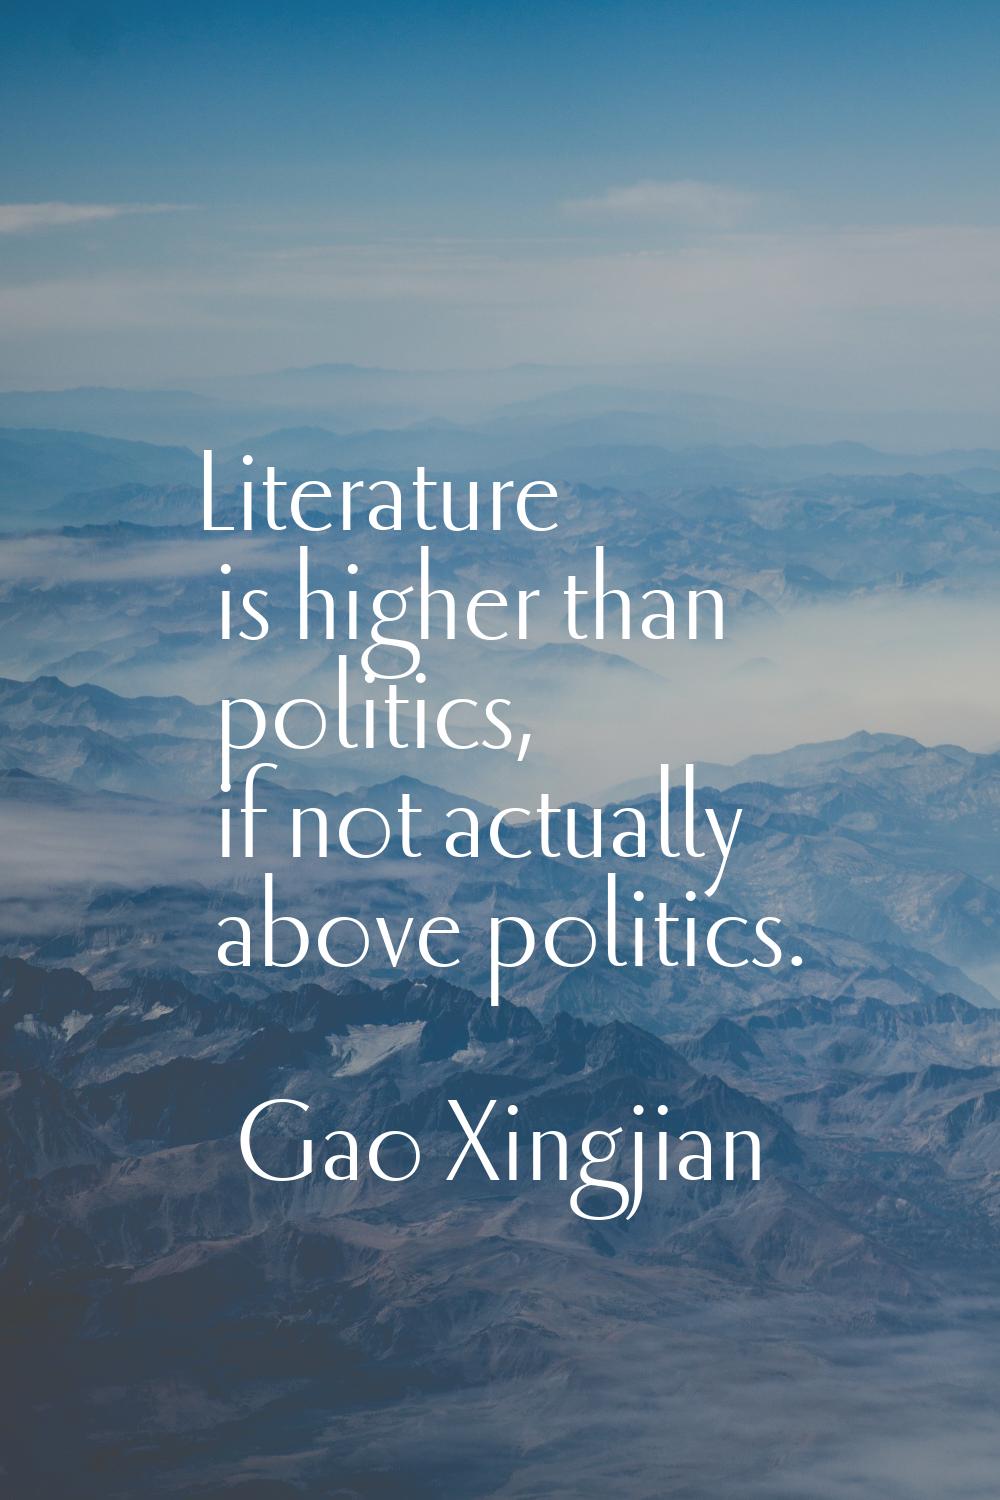 Literature is higher than politics, if not actually above politics.